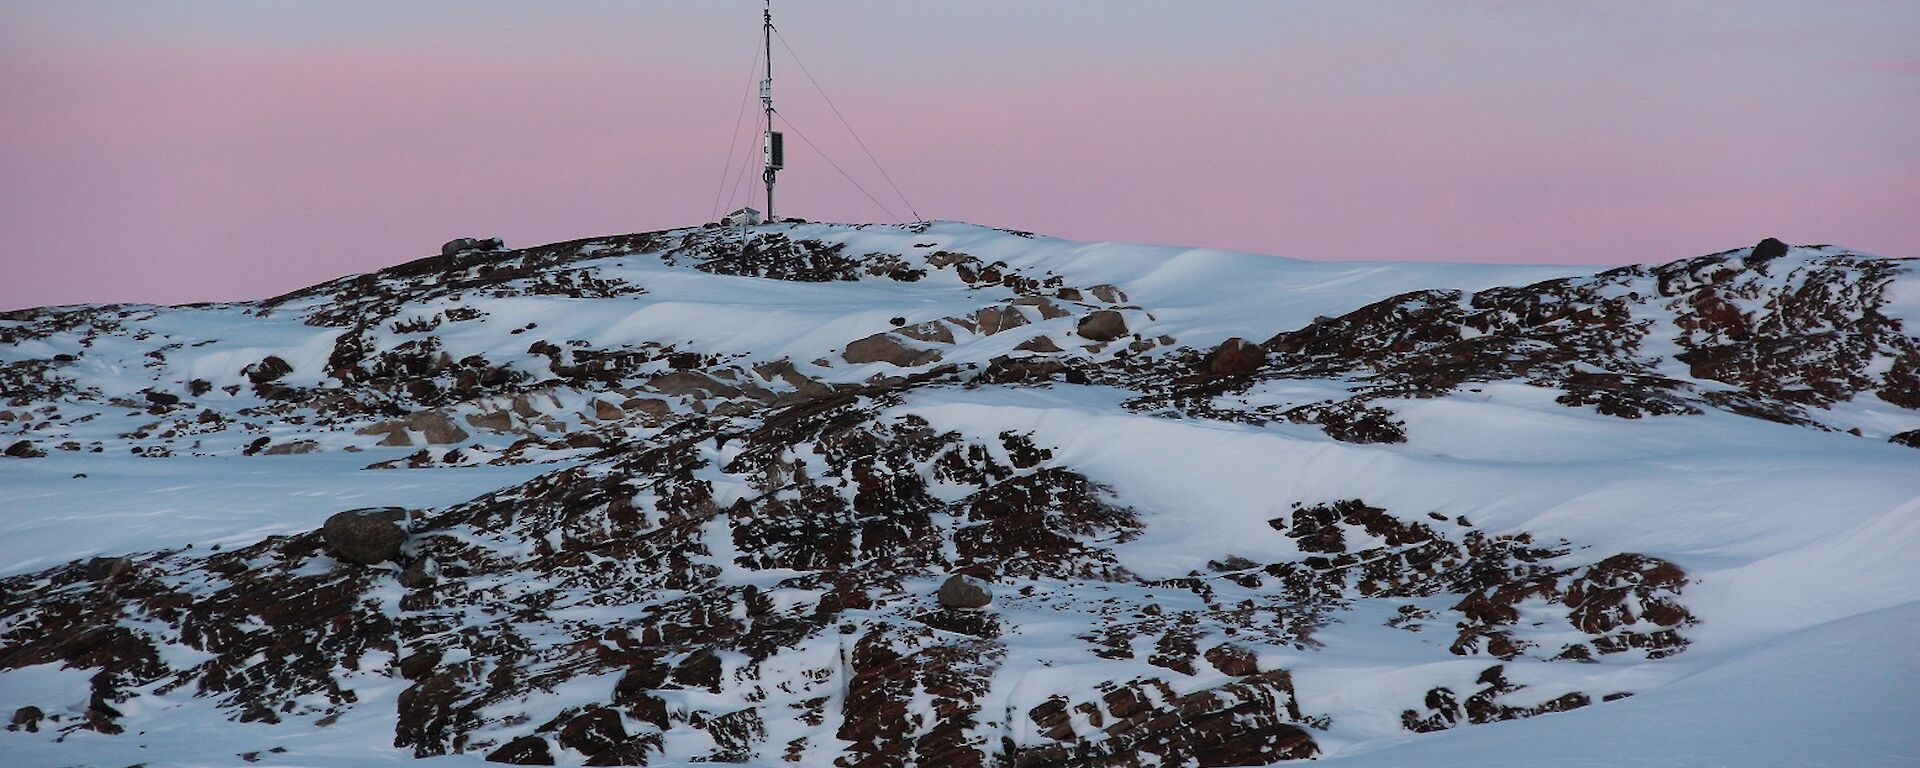 AWS mast on a rocky hill with pink sky